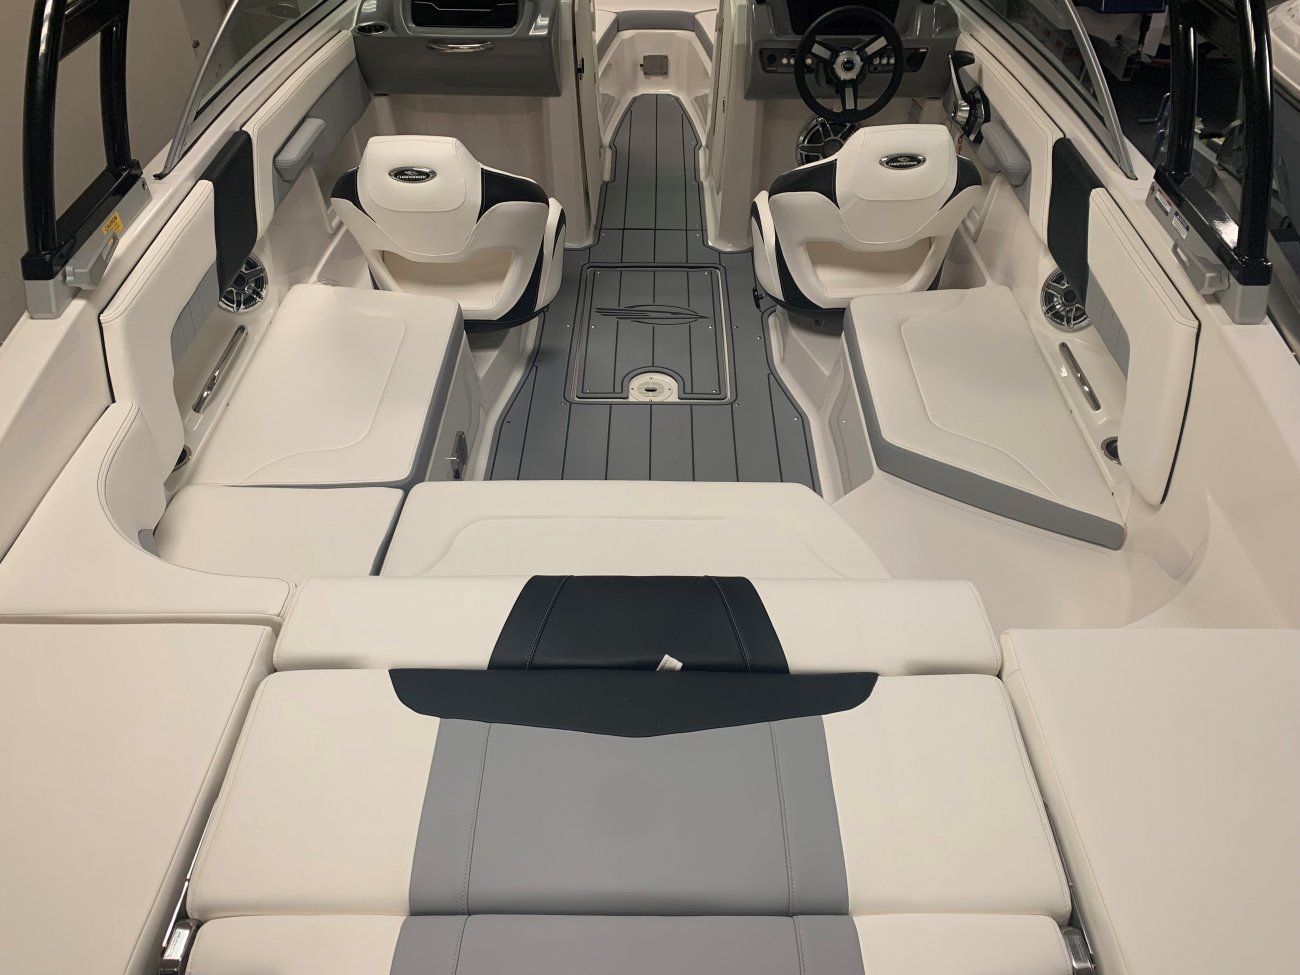 A bow rider is a boat with an open bow area where there are extra seats in front of the windshield.  Bow riders are typically between 17' and 30'long. They are well suited for many recreational water sports such as tubing, water skiing, and swimming.